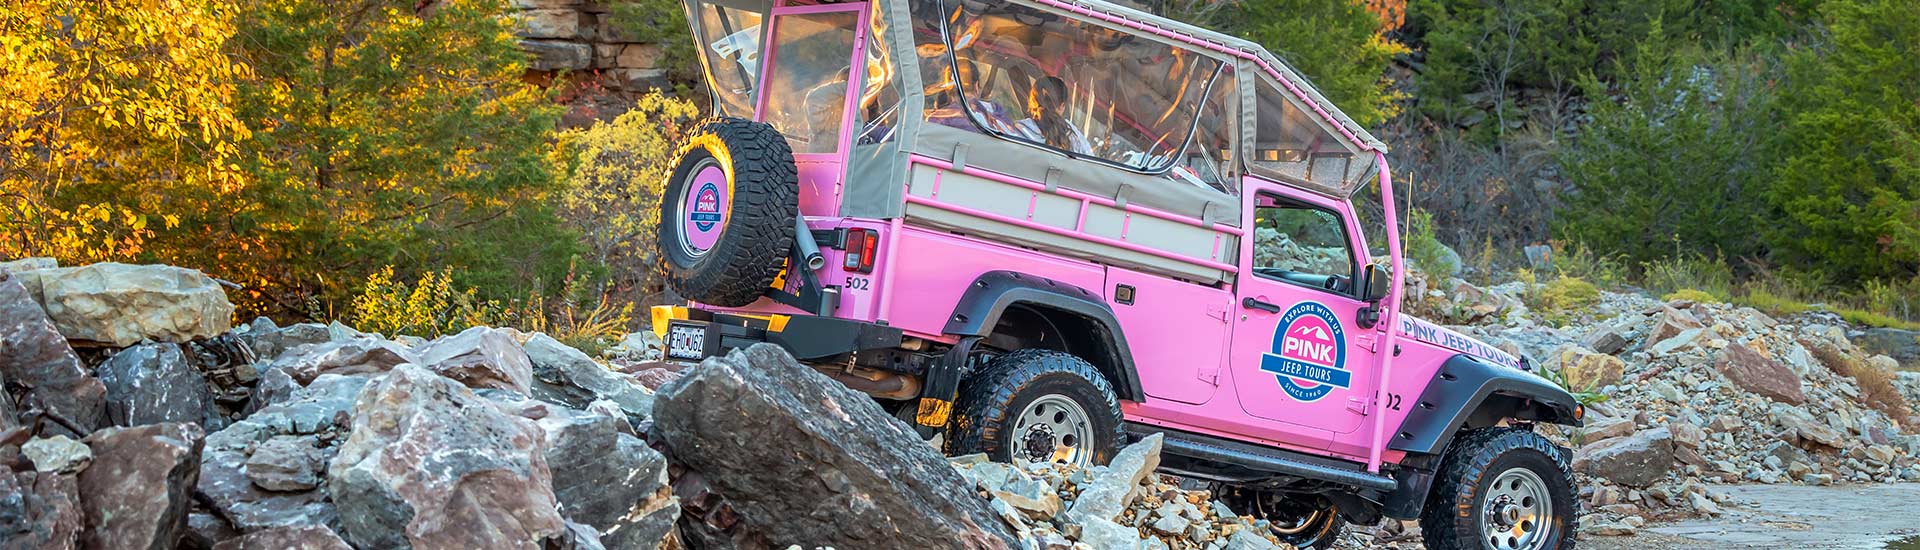 Close-up header image of golden sunlight reflecting onto the rear of a Pink Jeep Wrangler at the Baird Mountain Rock Quarry.